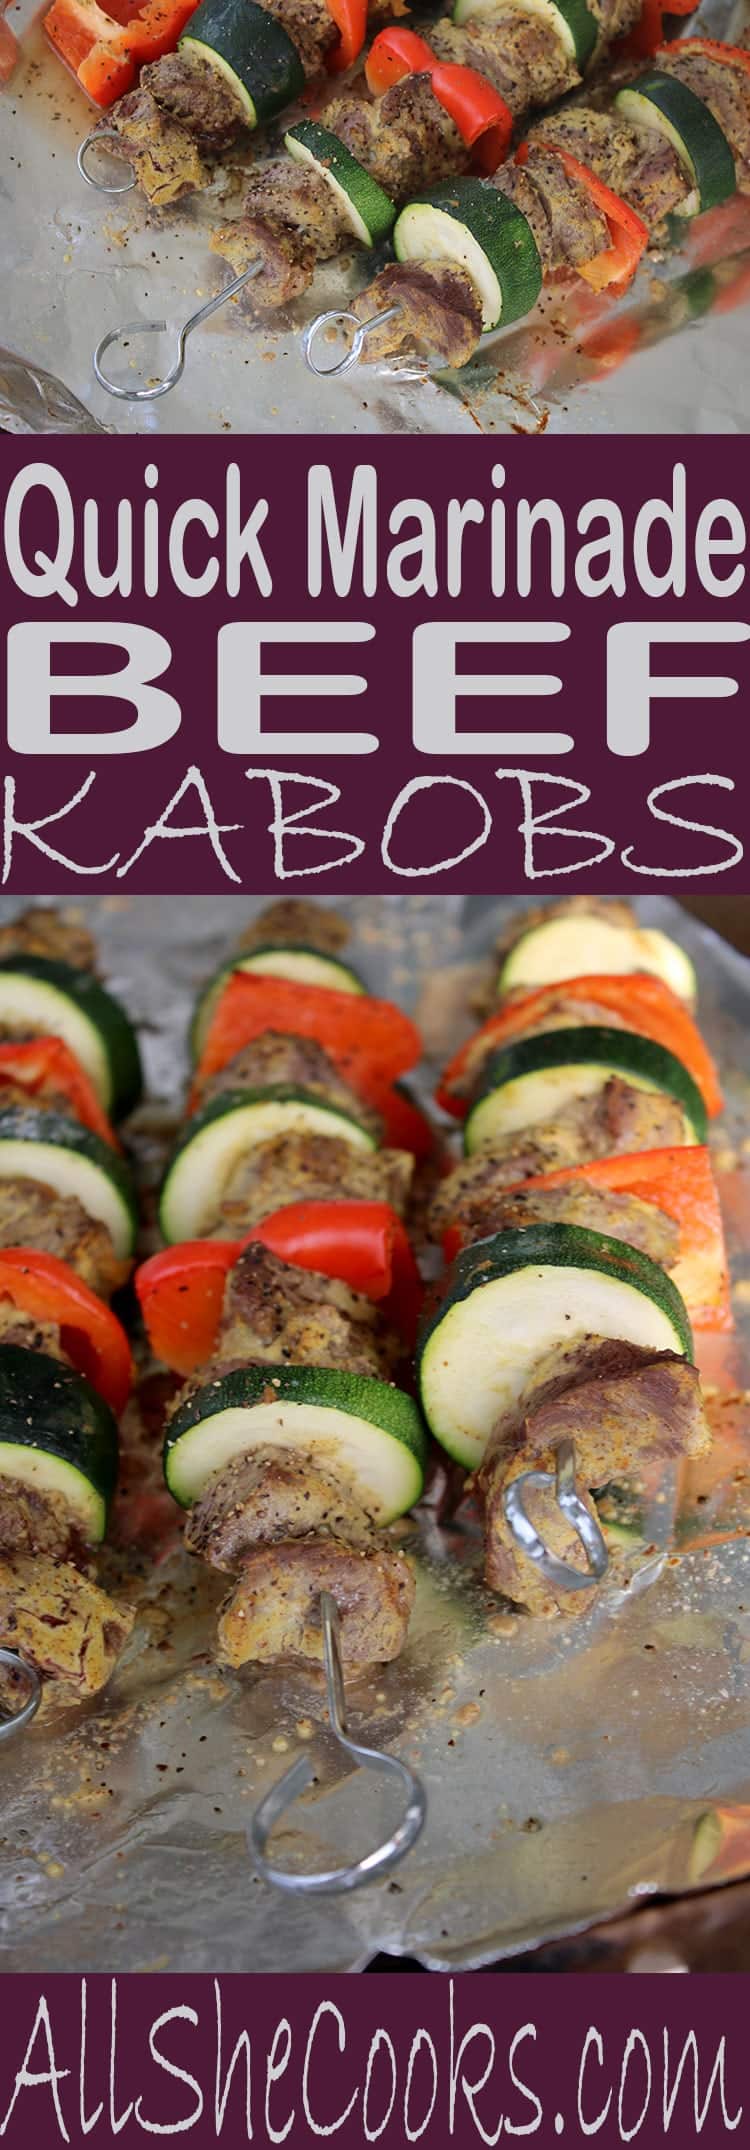 Make these tasty Quick Marinade Beef Kabobs with Vegetables in no time. We use a pantry staple ingredient to make a flavorful kabob recipe you will want to make again and again.